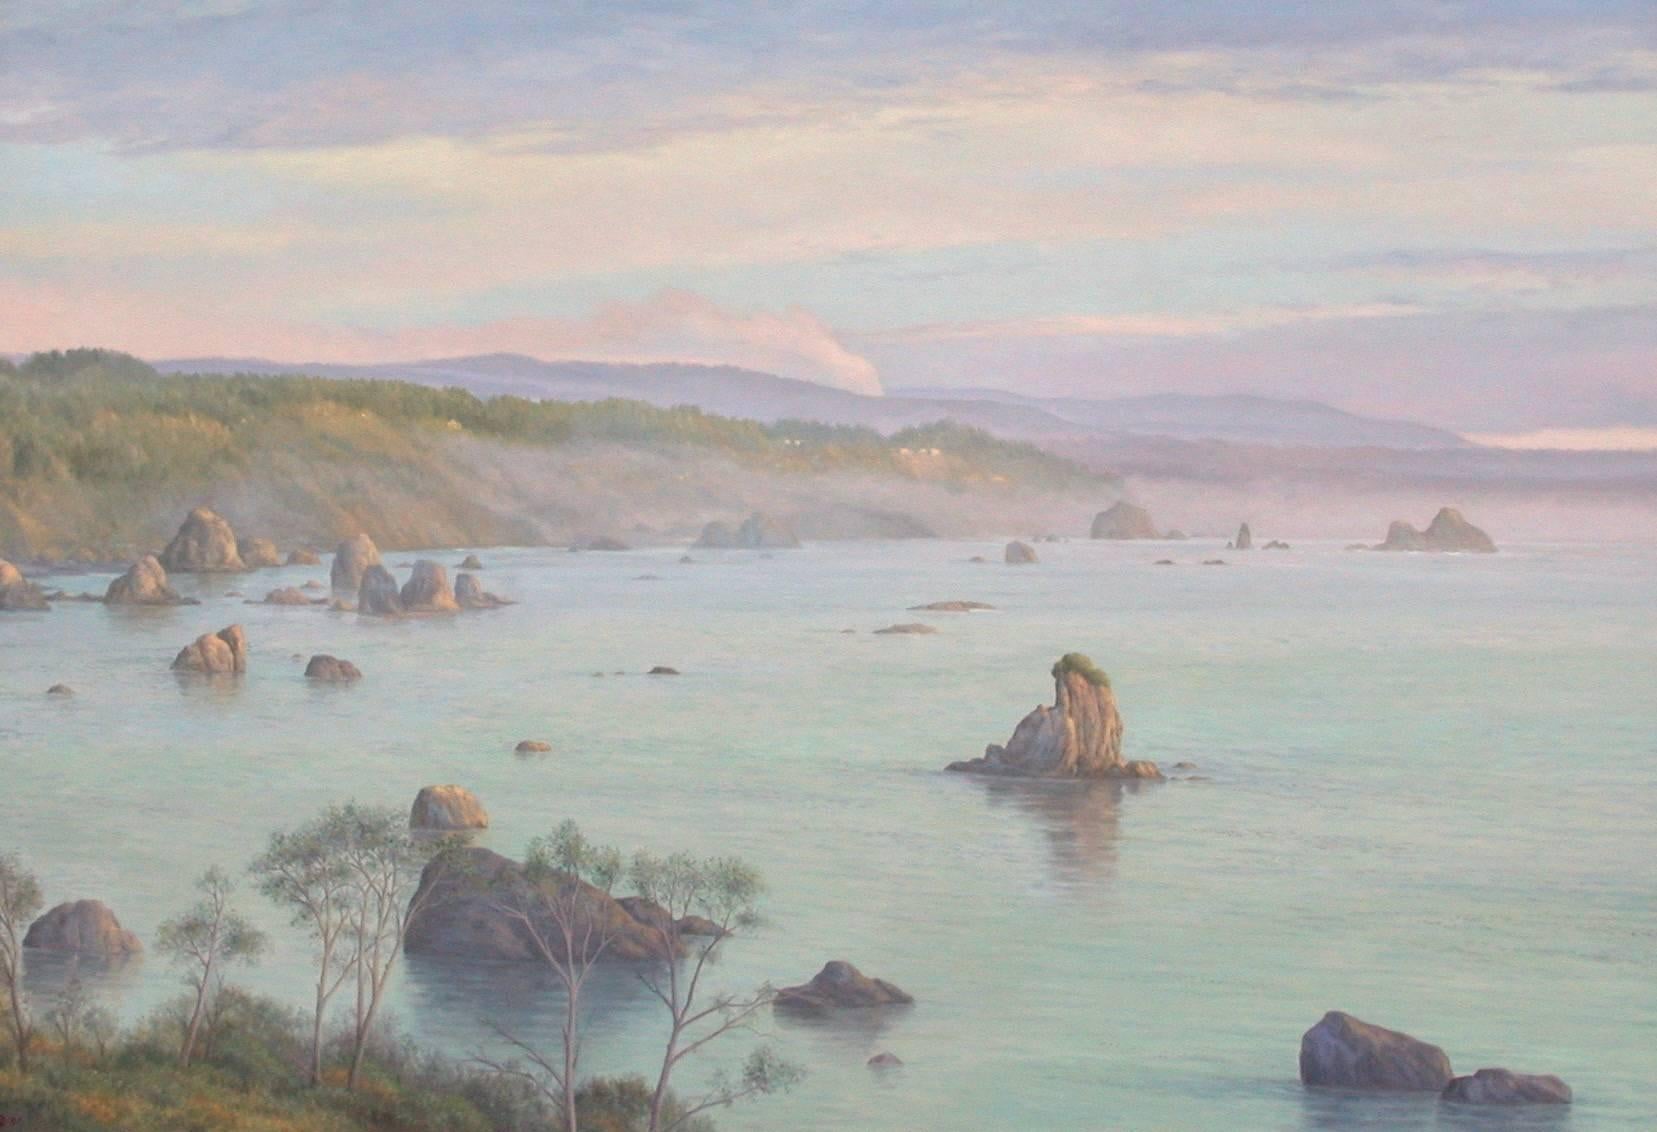 'North Coast Stacks', by one of the finest American contemporary realist painters, Willard Dixon, who has painted western landscapes and nature-scenes for 35 years, capturing the undeniable beauty of the West with its grand and humble spirit. This